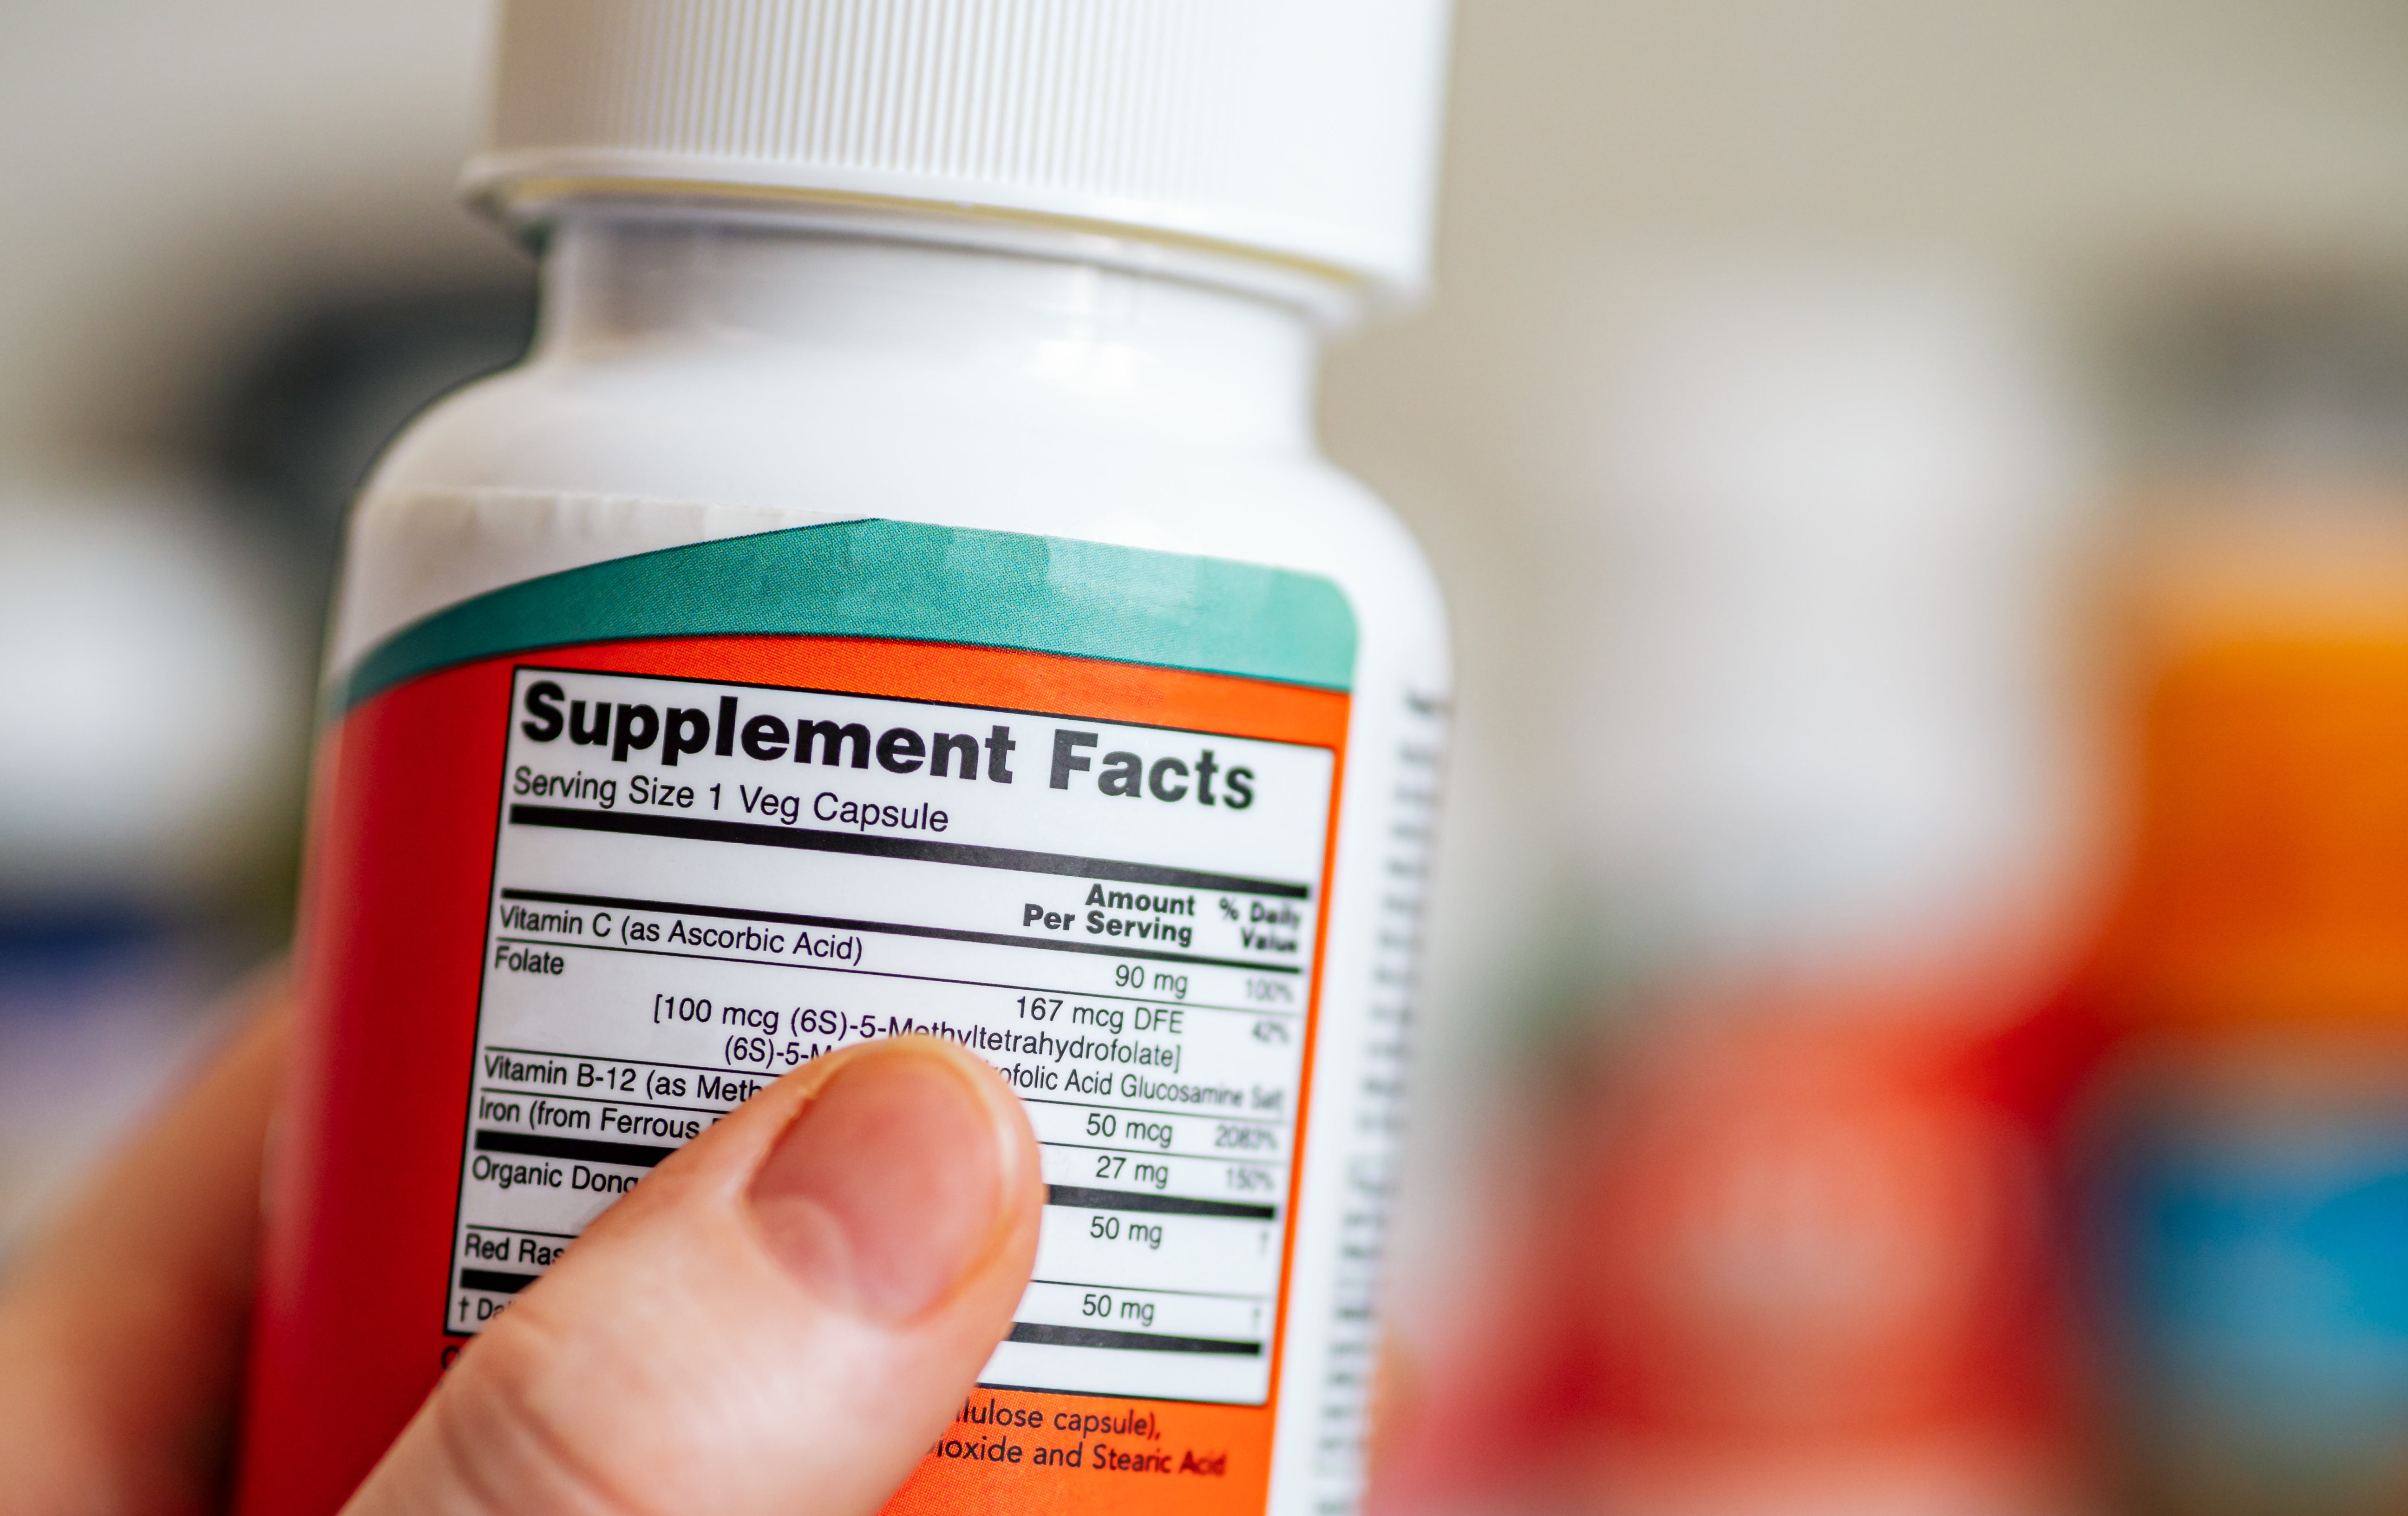 How to read supplement labels